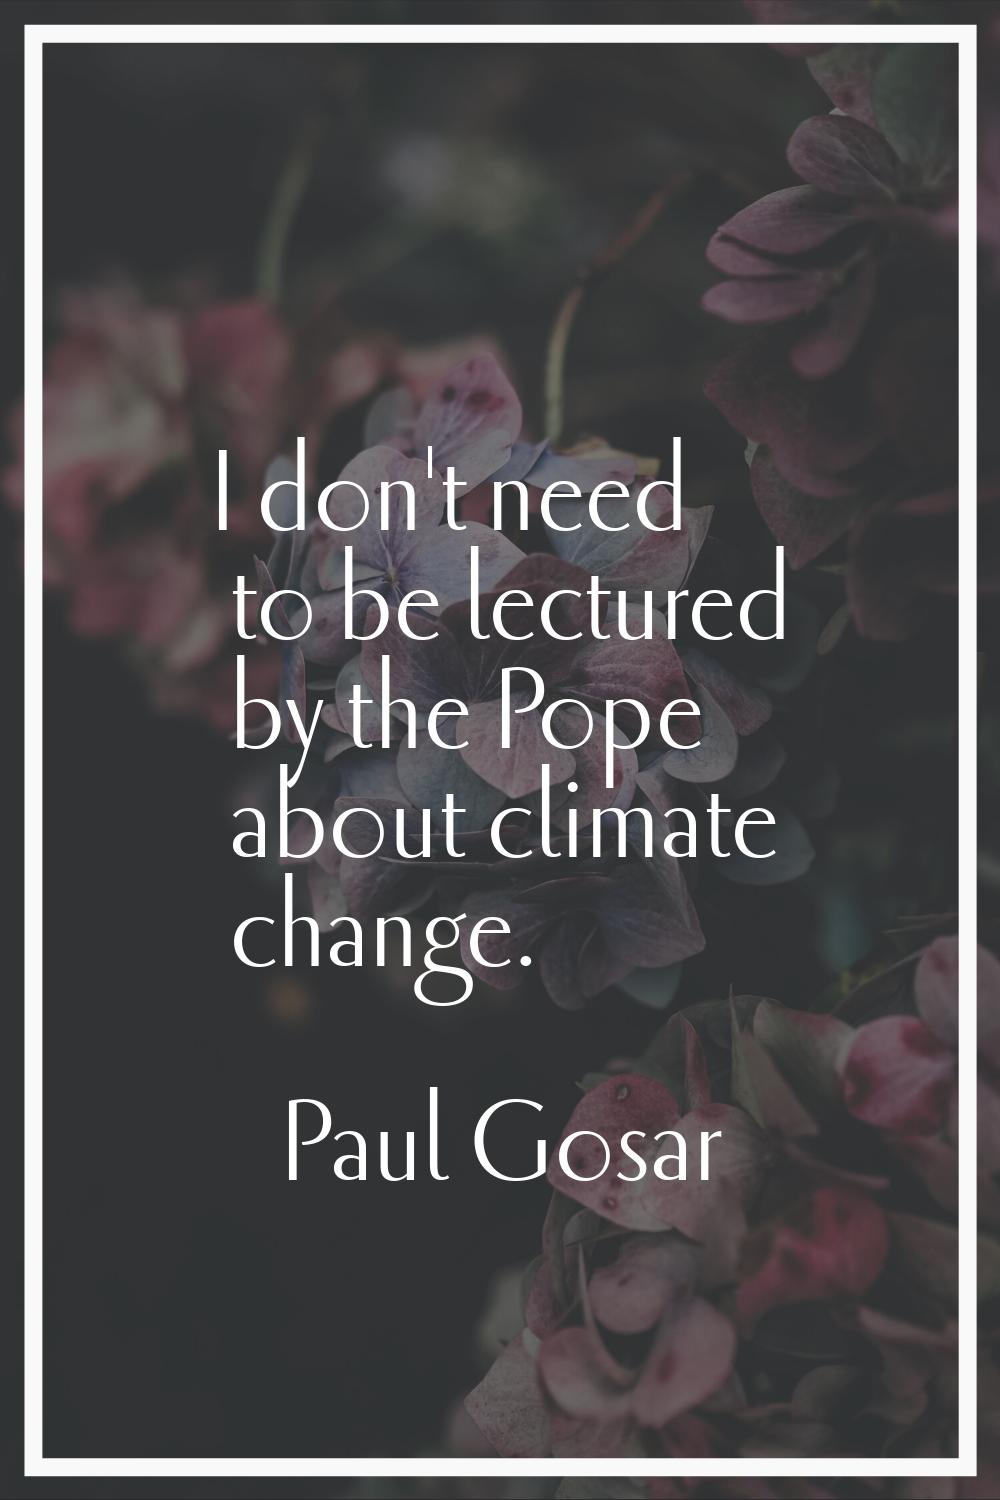 I don't need to be lectured by the Pope about climate change.